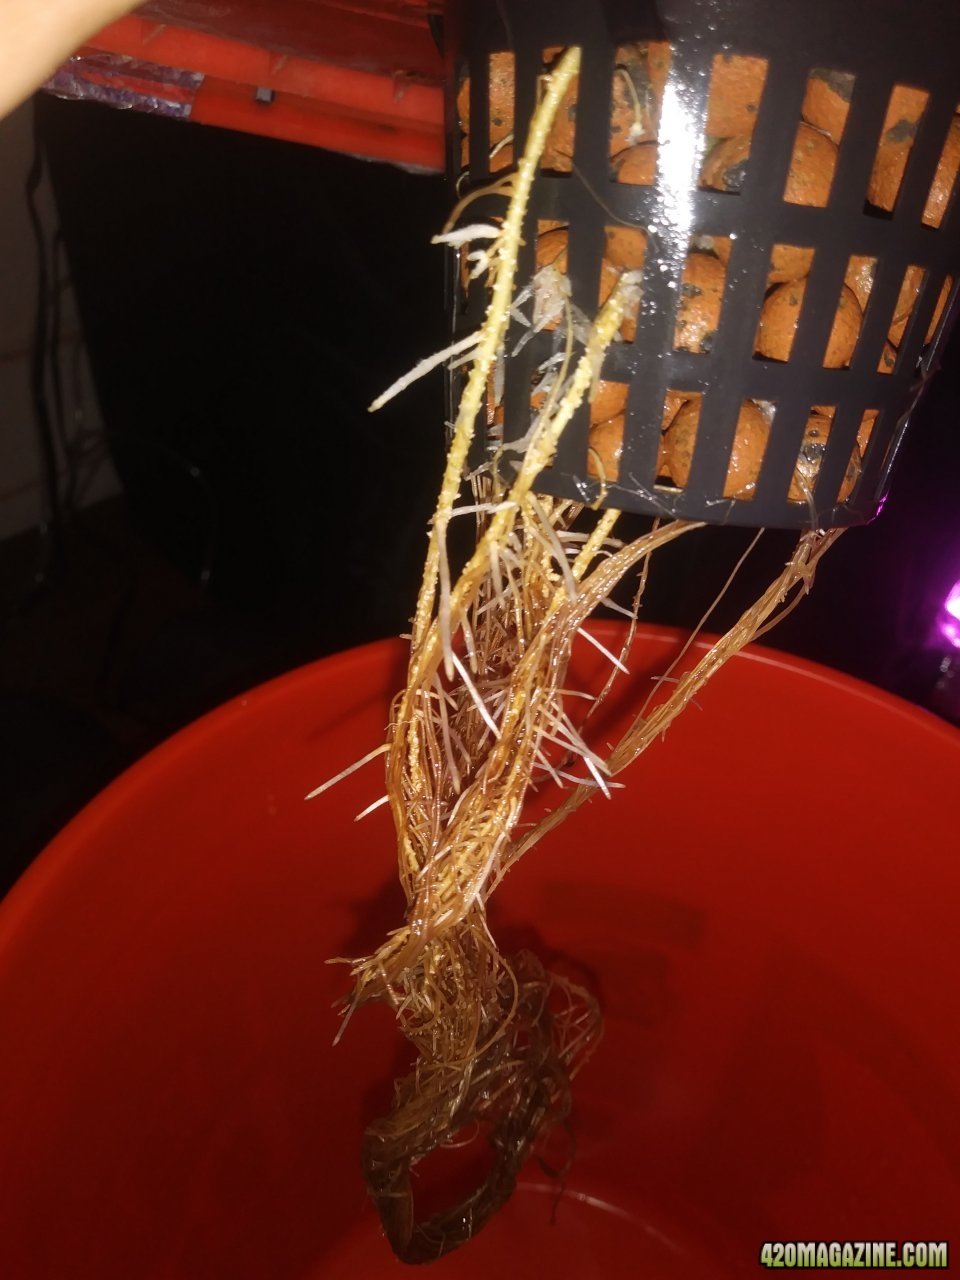 New root growth